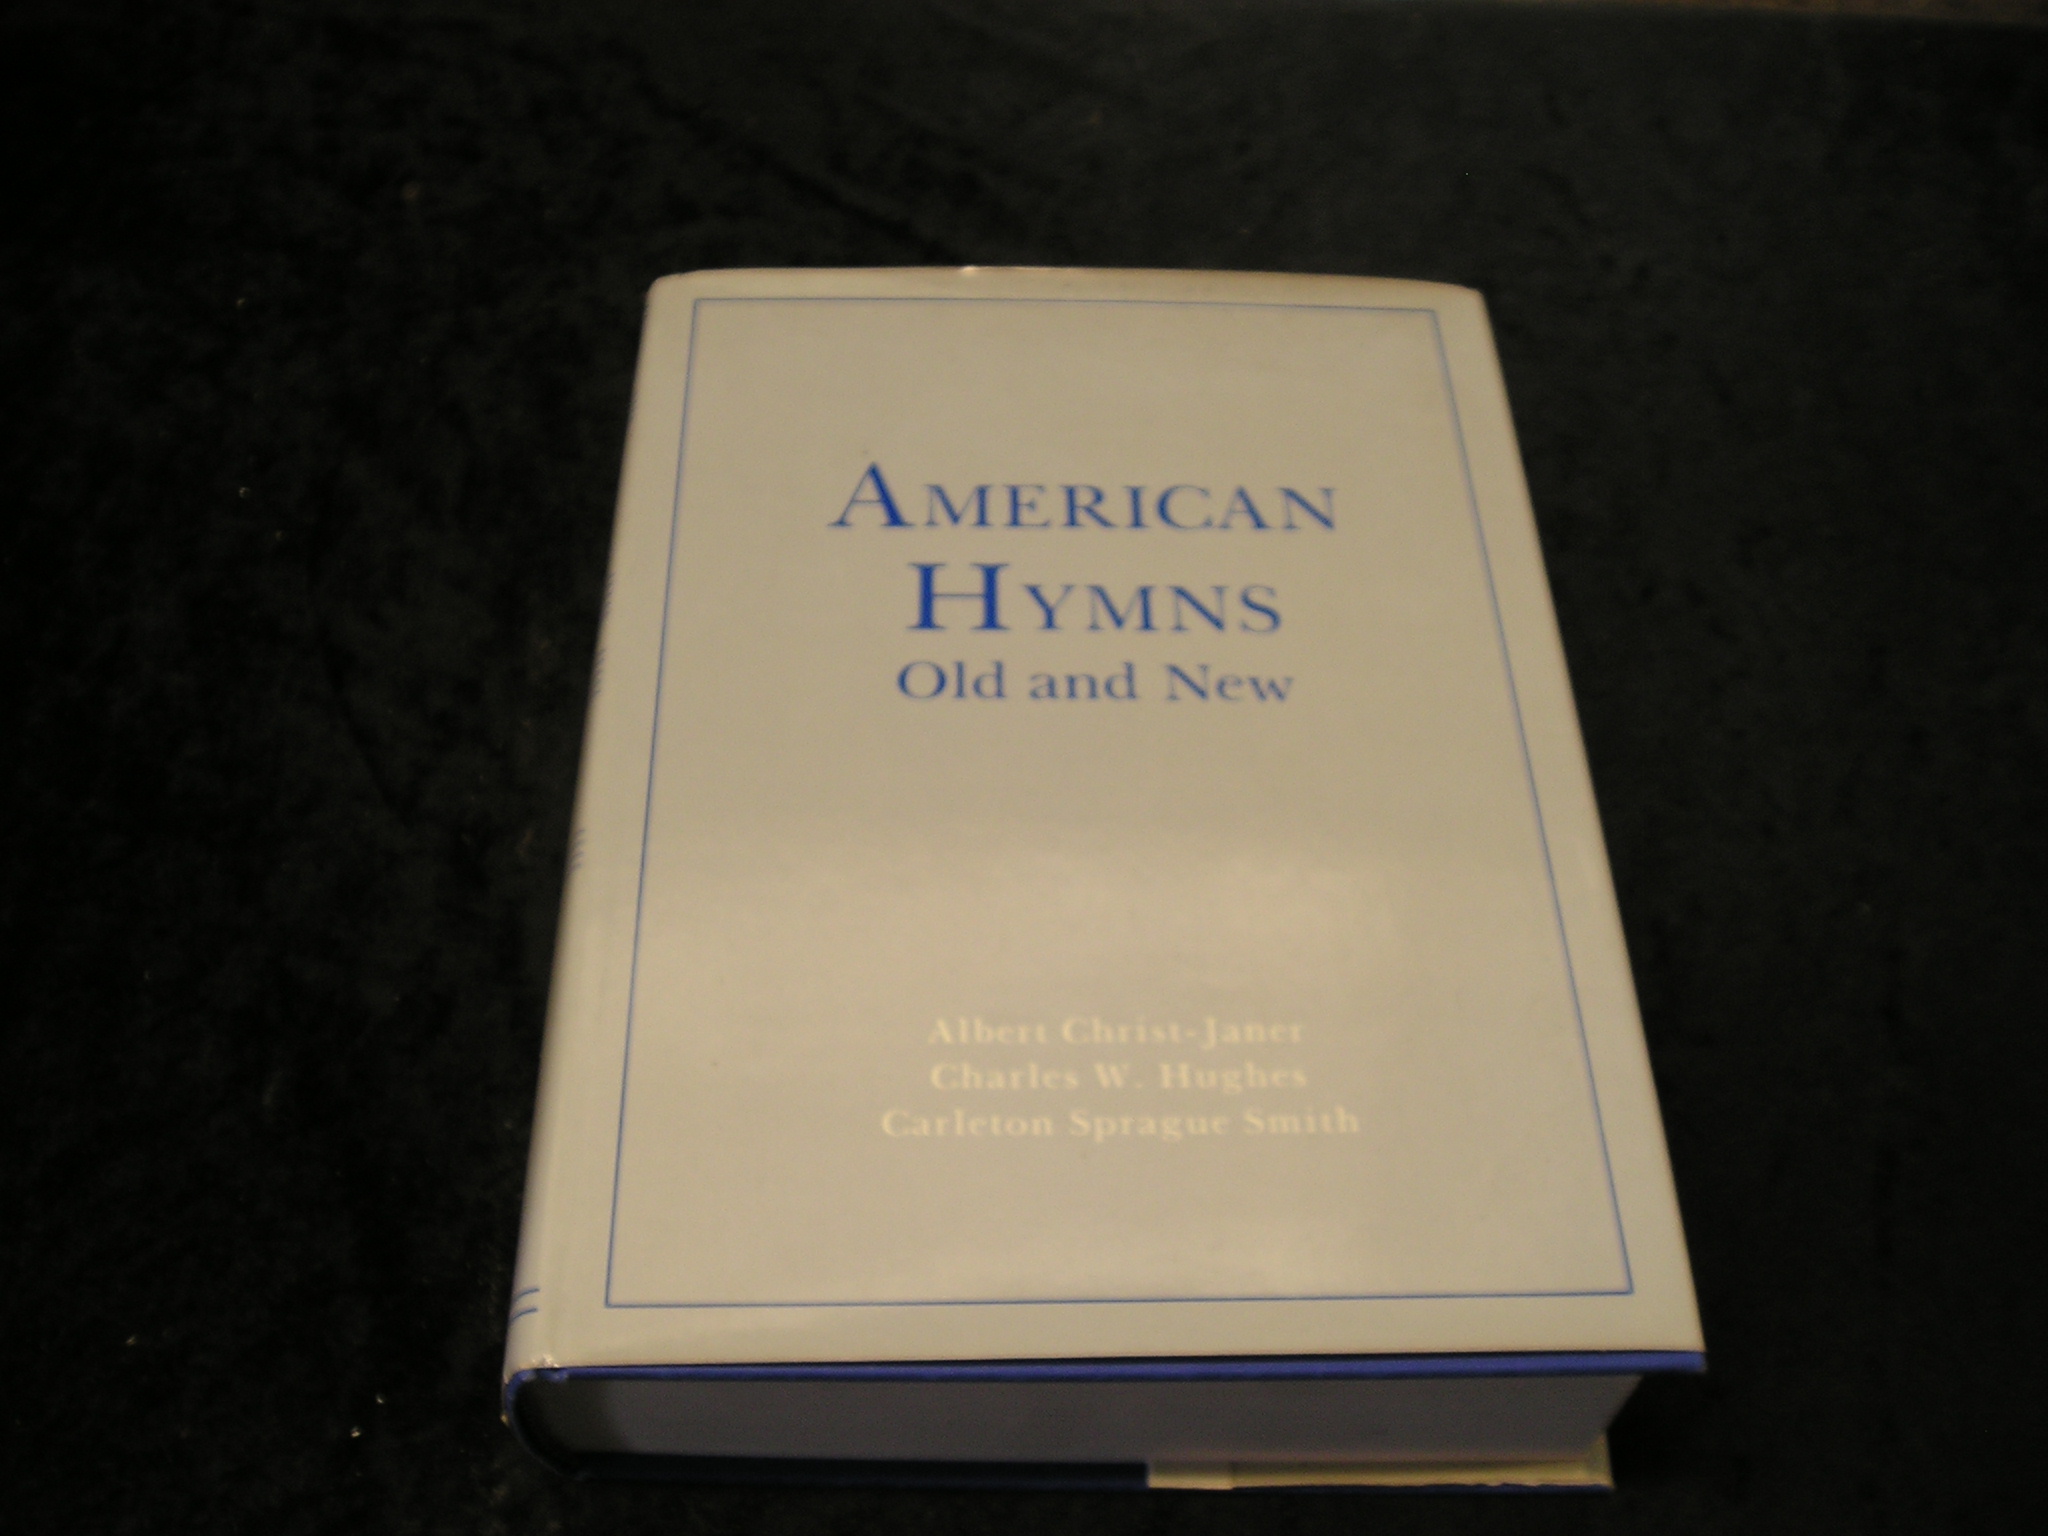 American Hymns Old and New